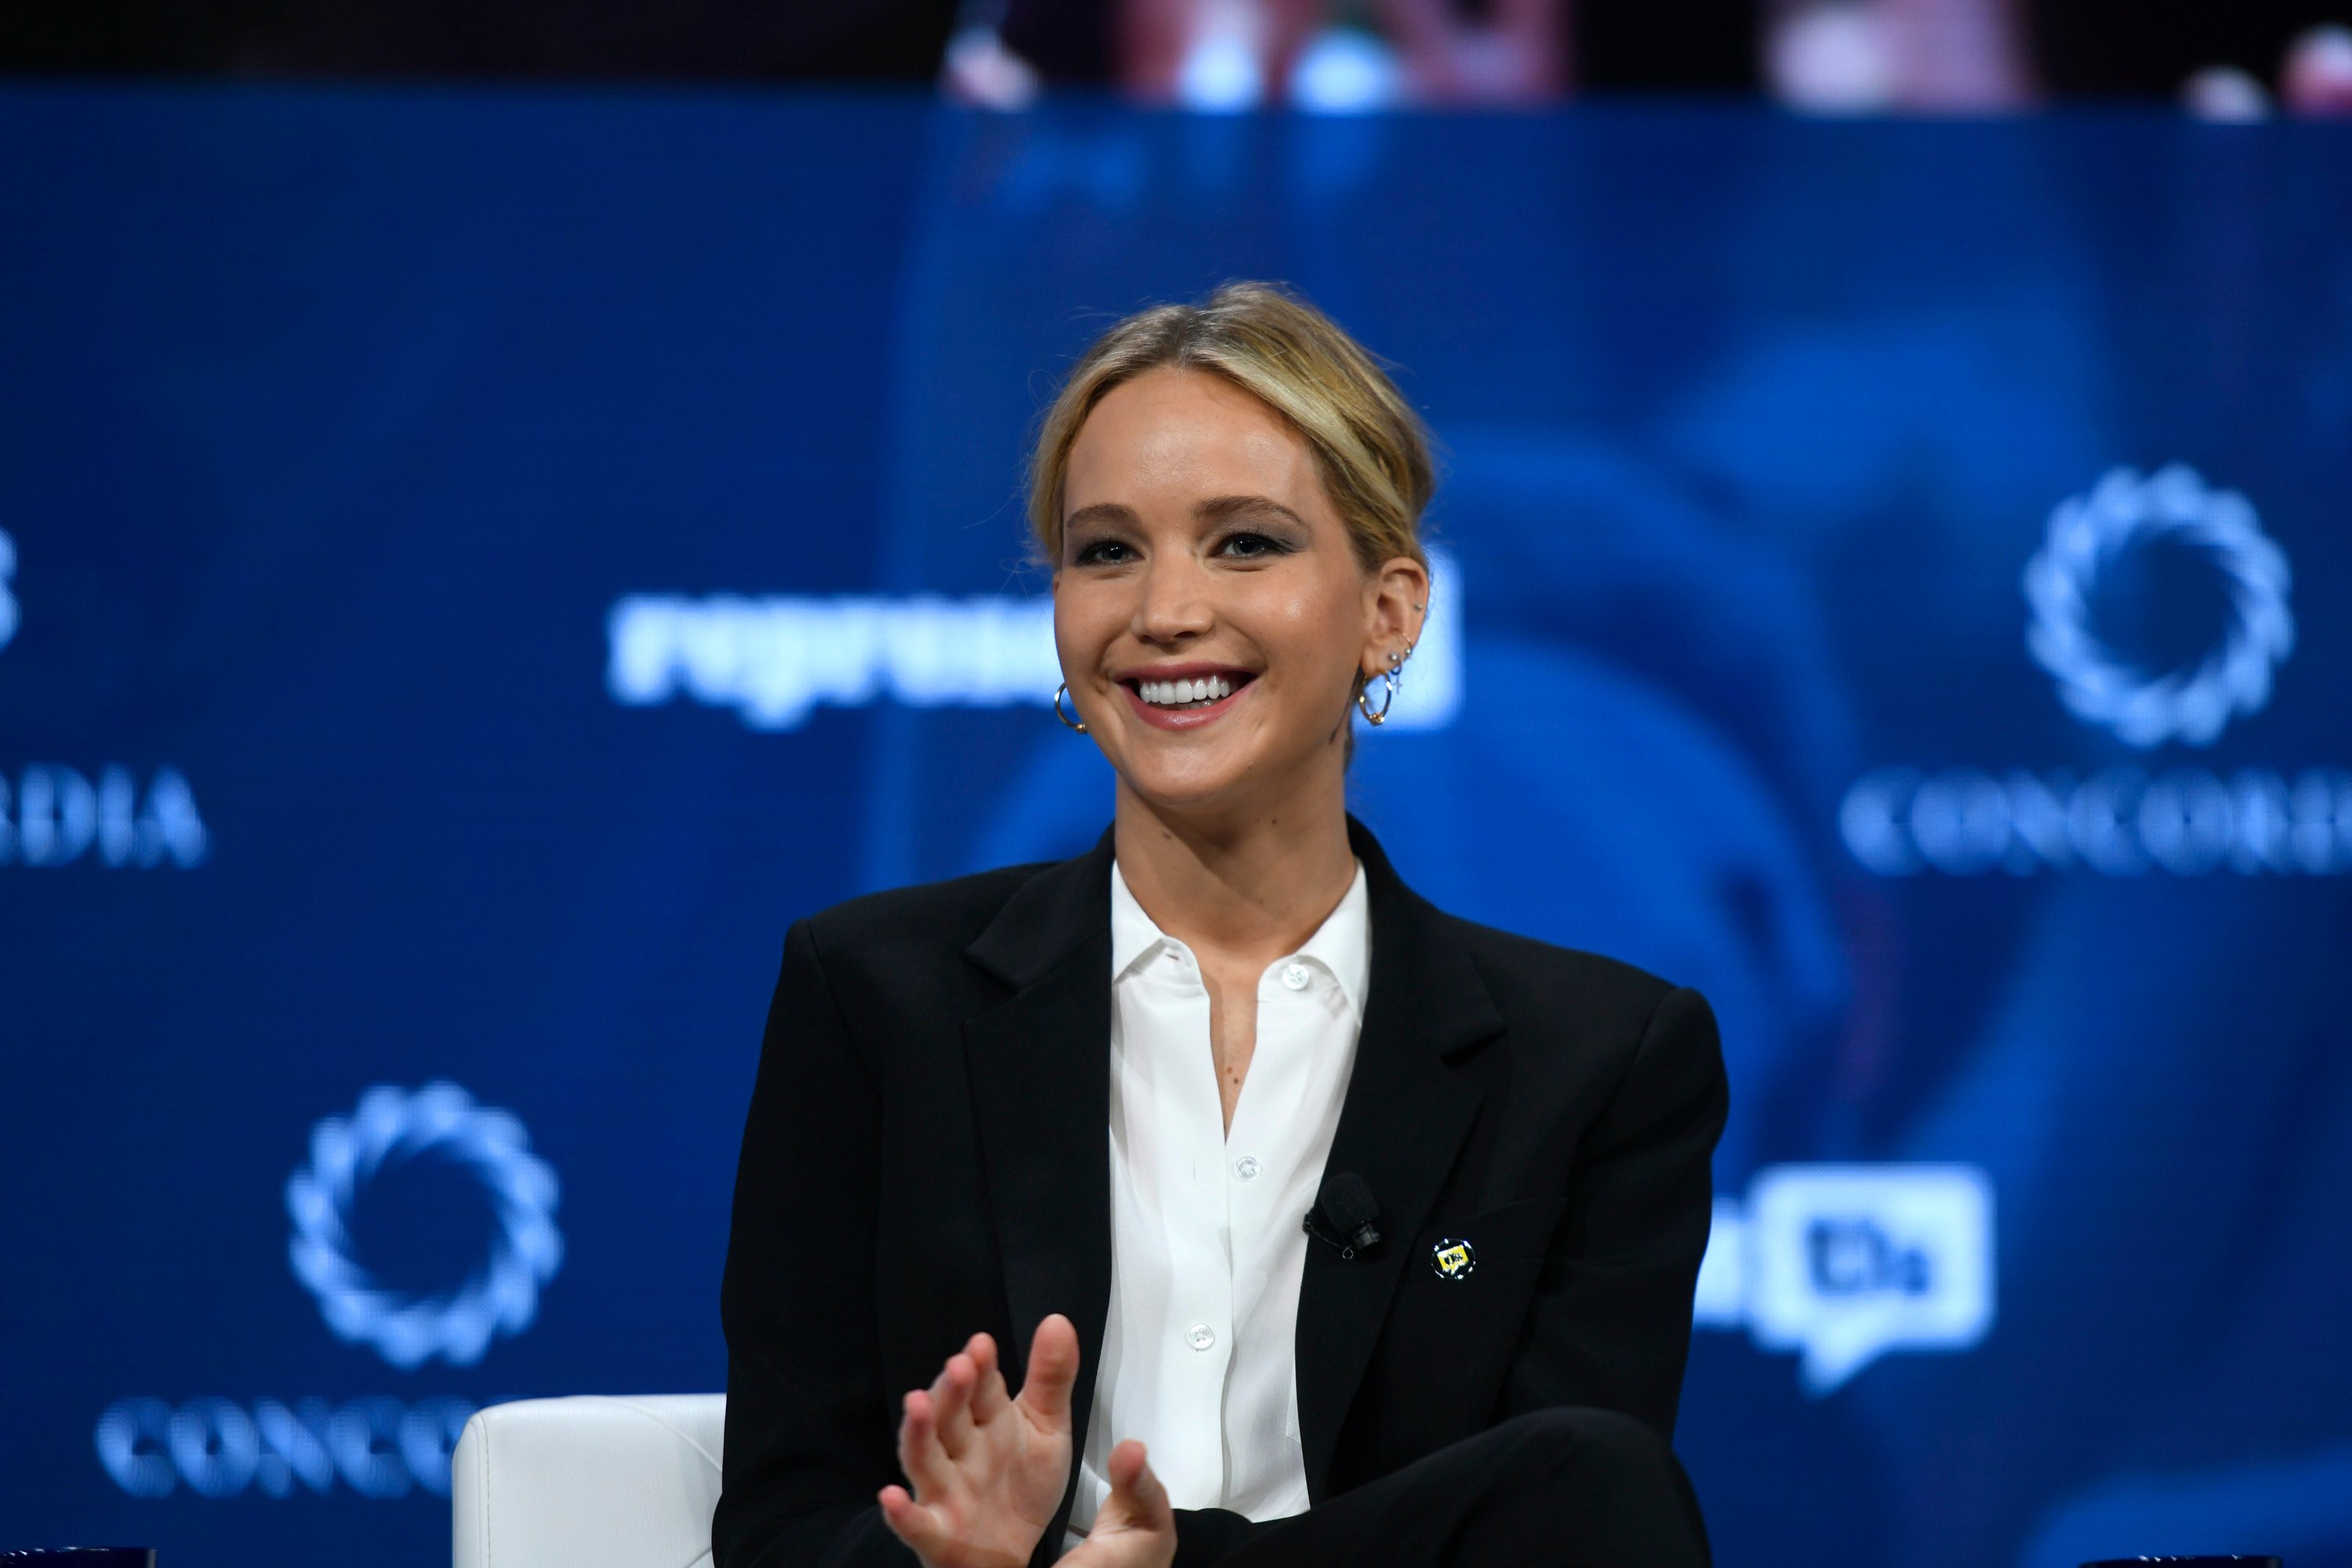 Jennifer Lawrence speaking onstage during the 2018 Concordia Annual Summit